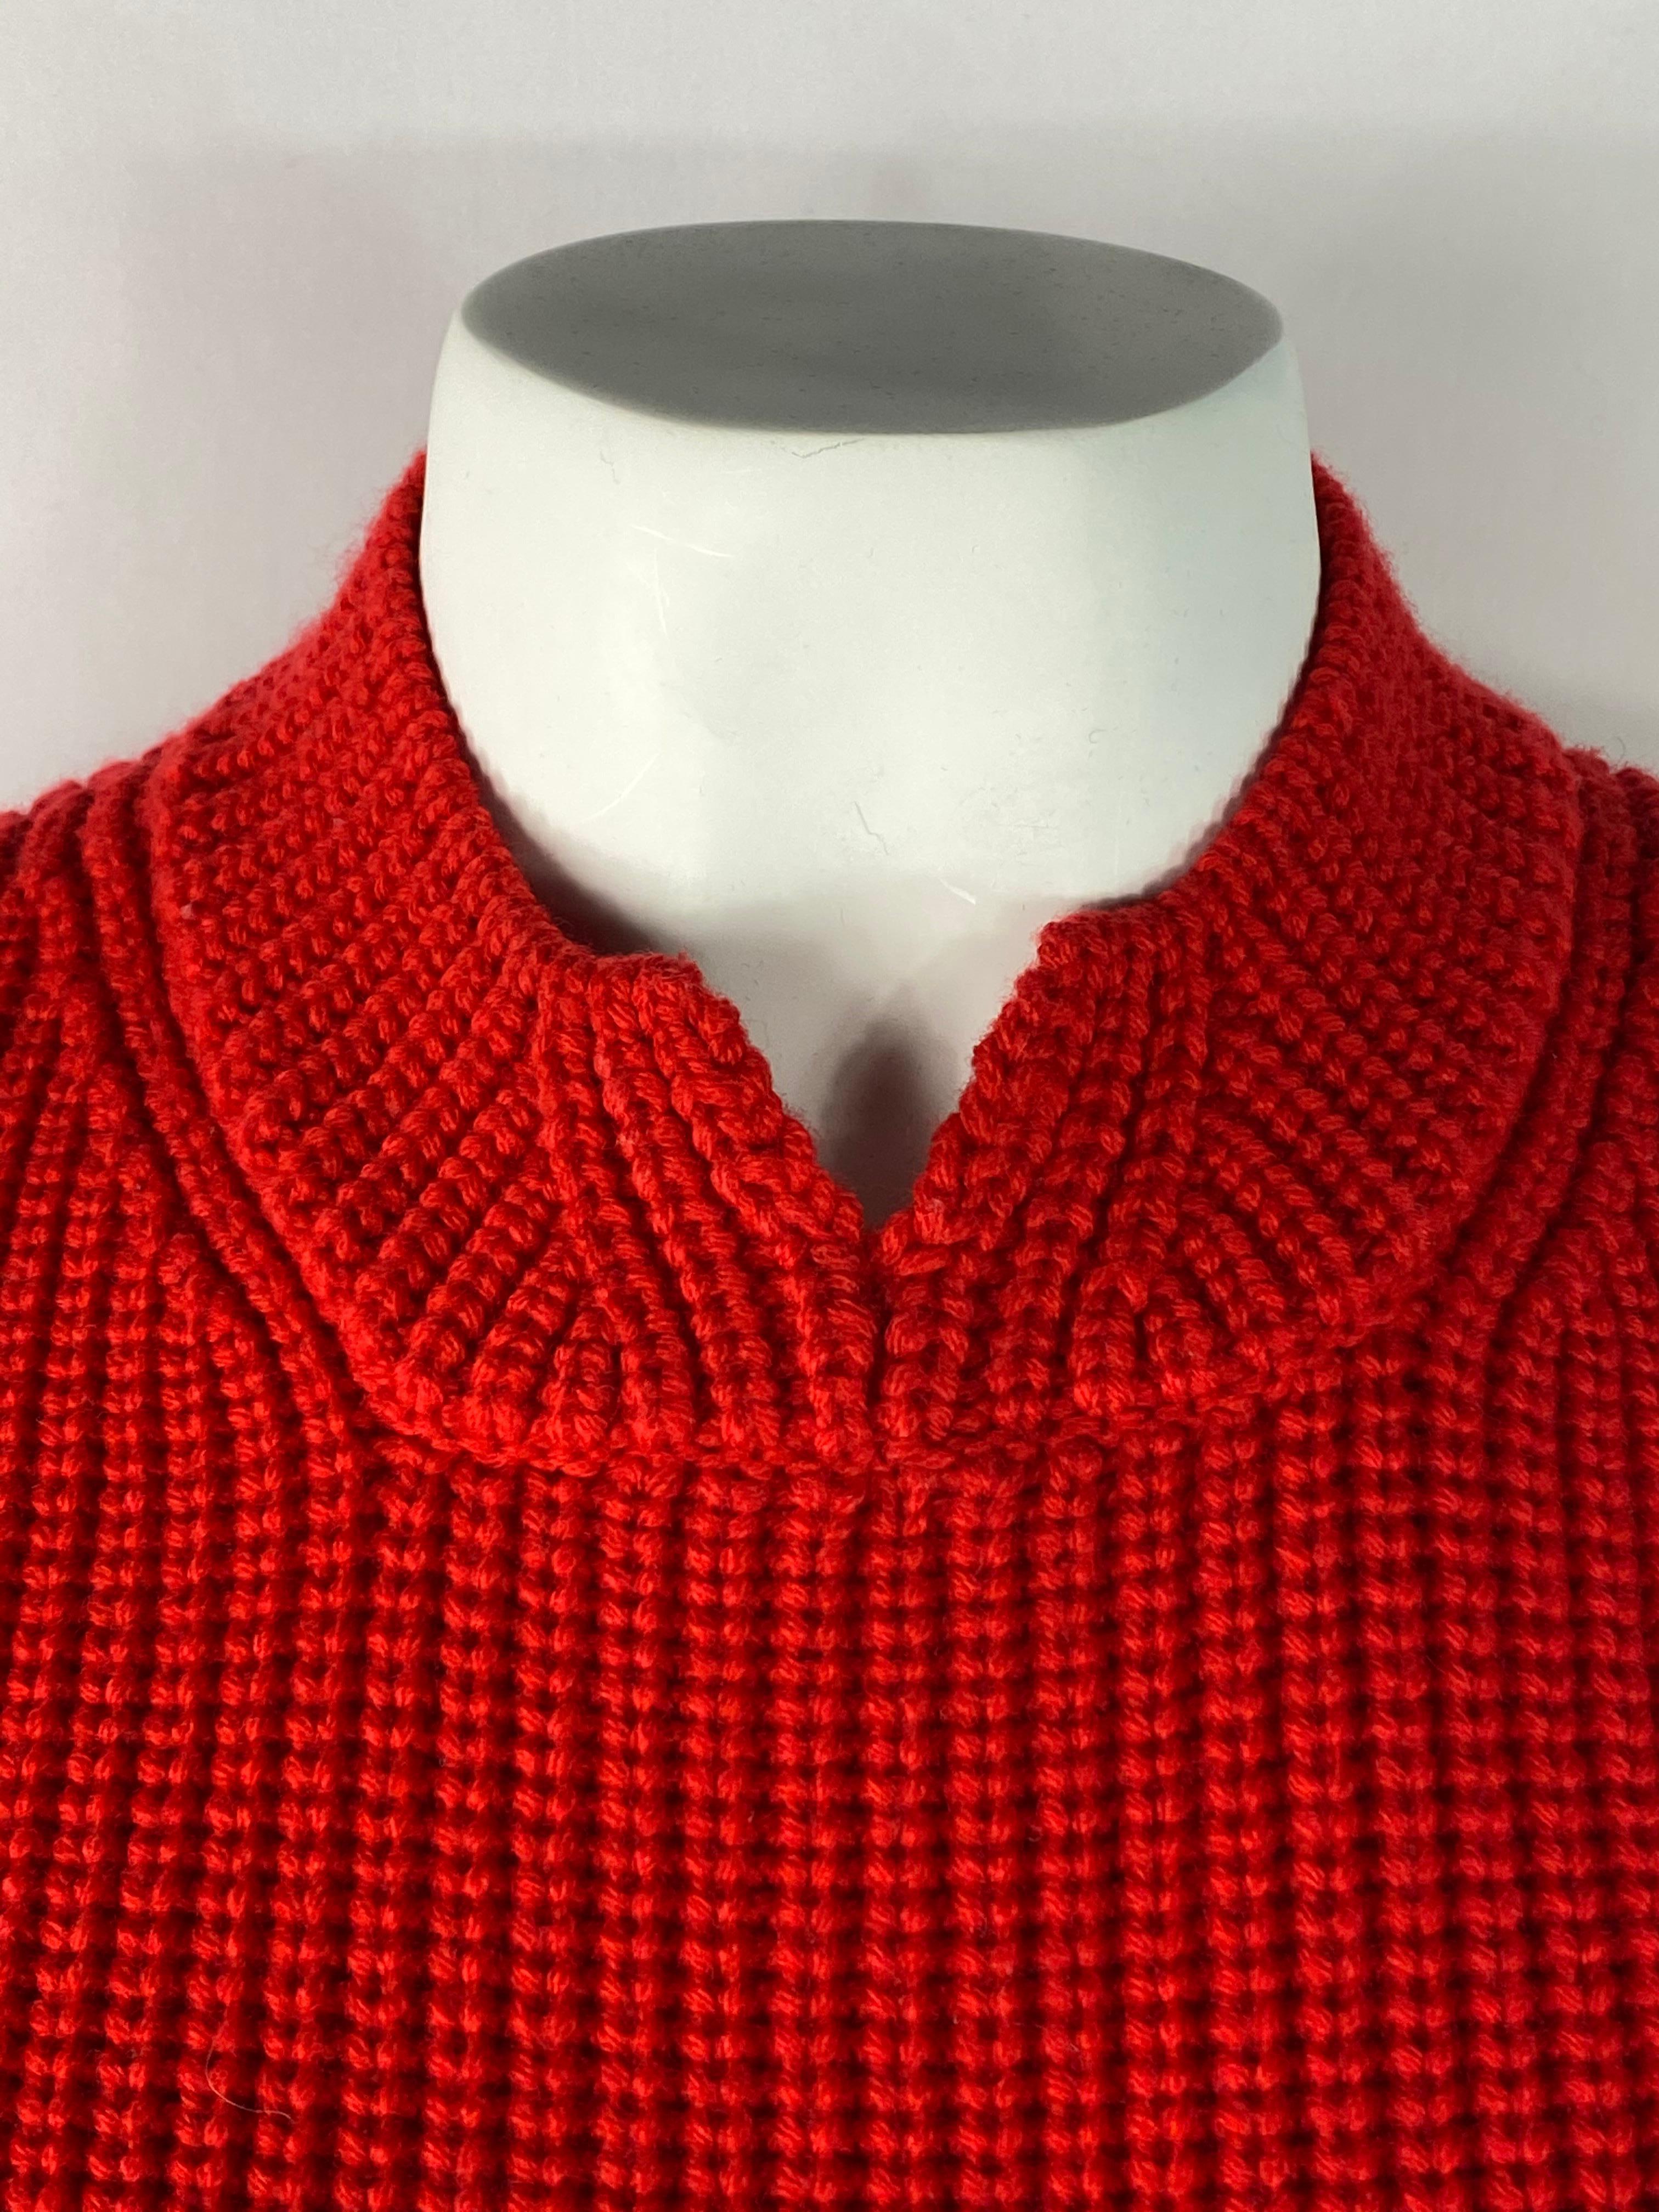 Product details:

Featuring red wool knit vest designed by Carven in Italy in medium size.